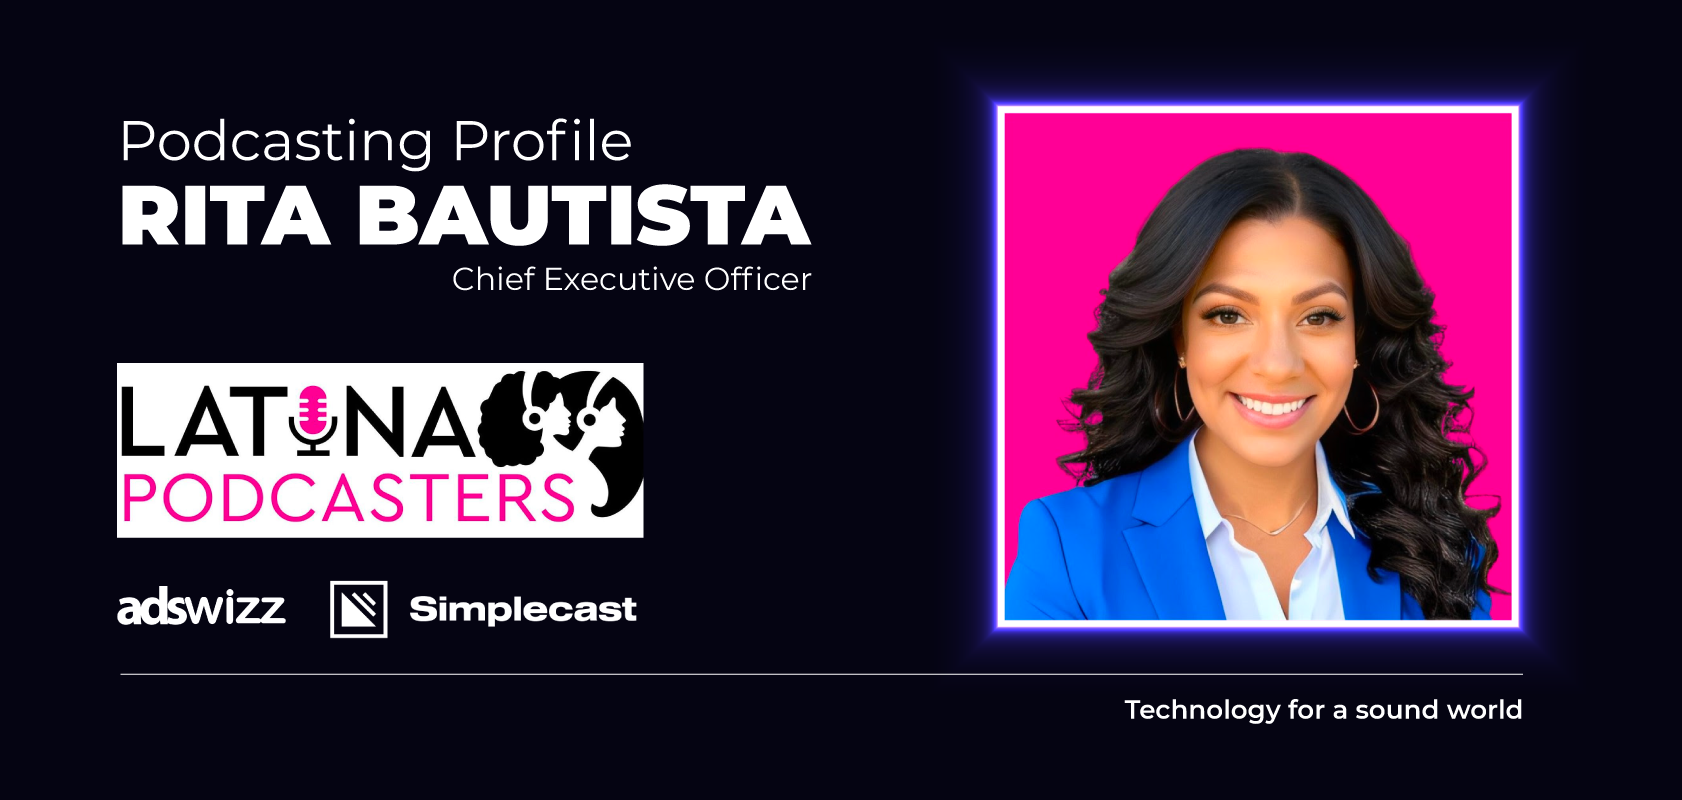 Podcaster Profile: Rita Bautista, Chief Executive Officer of Latina Podcasters. Presented by AdsWizz and Simplecast: Technology for a sound world.